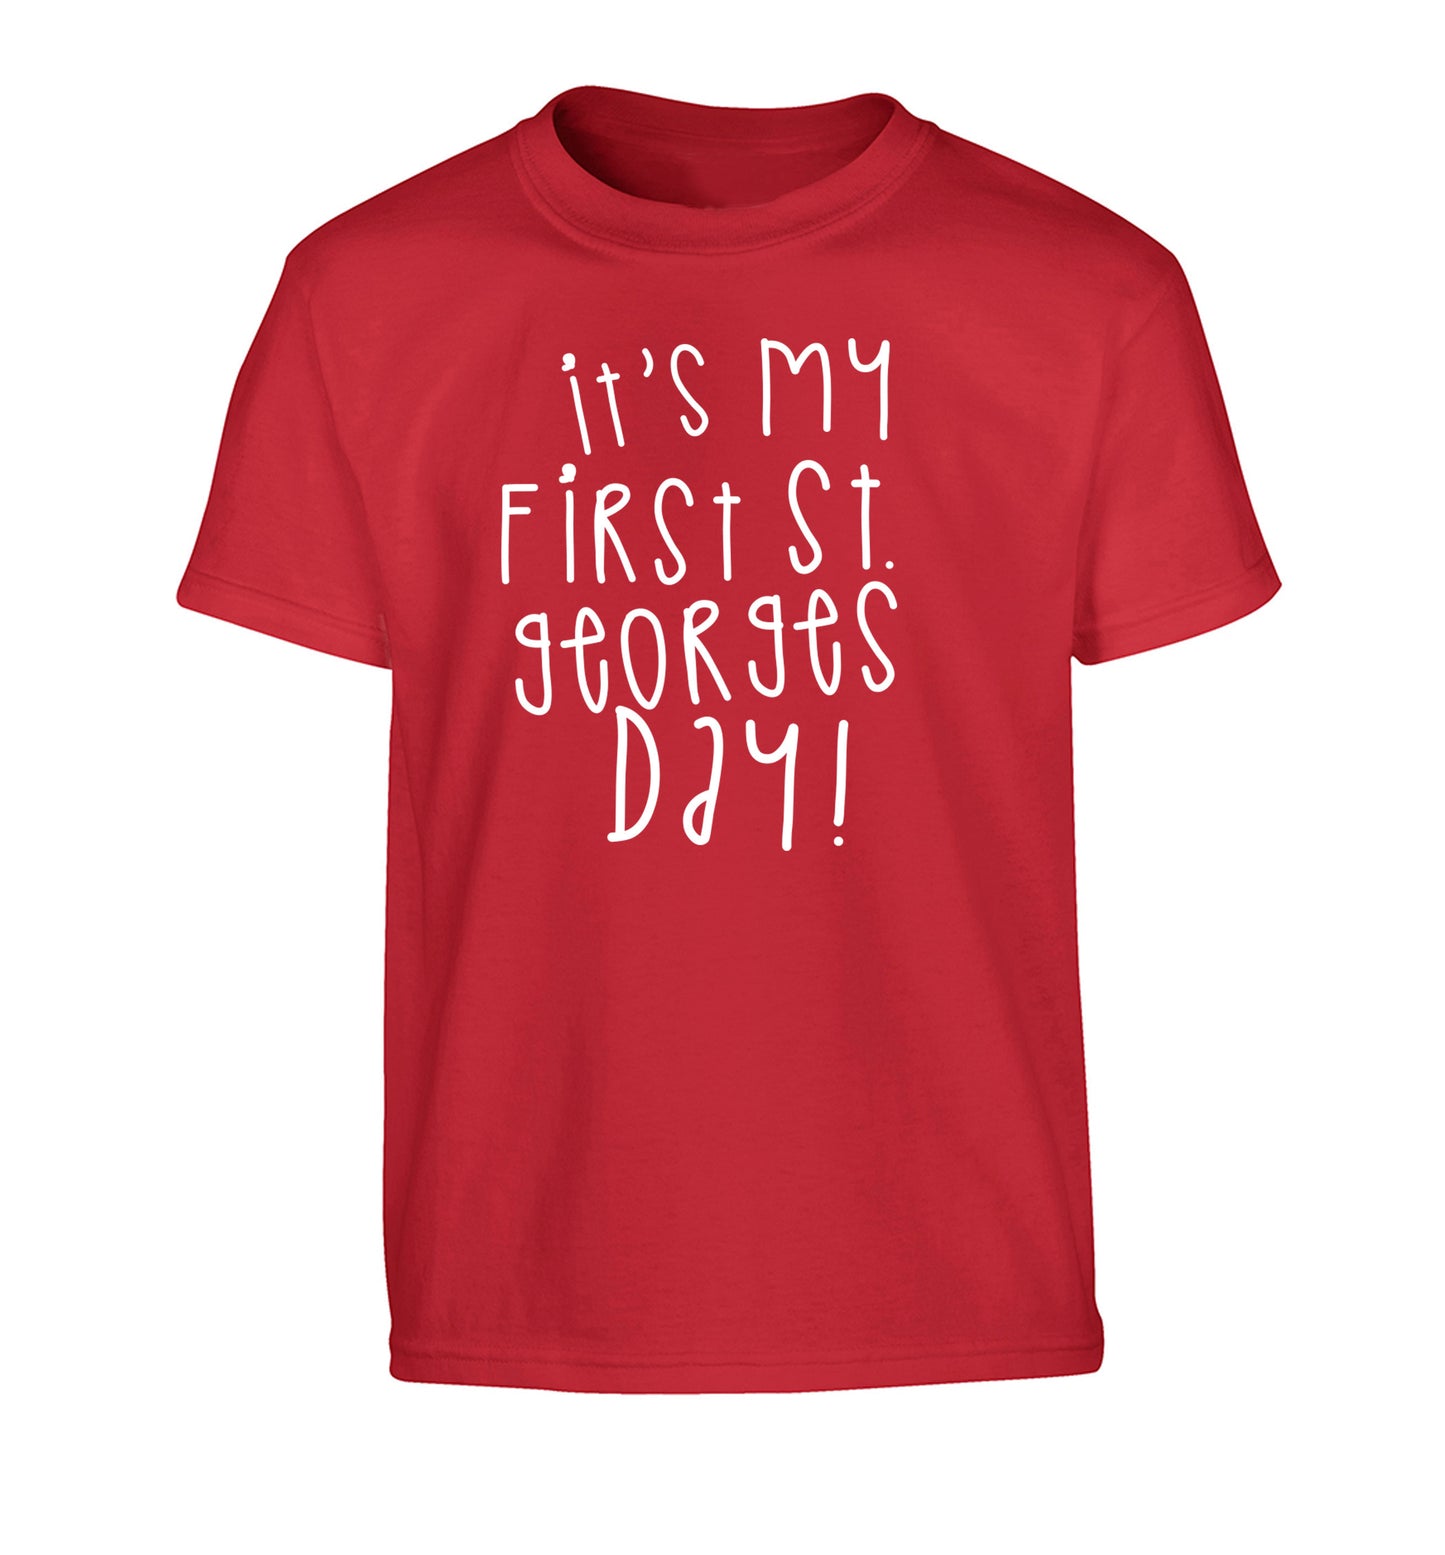 It's my first St Georges day Children's red Tshirt 12-14 Years